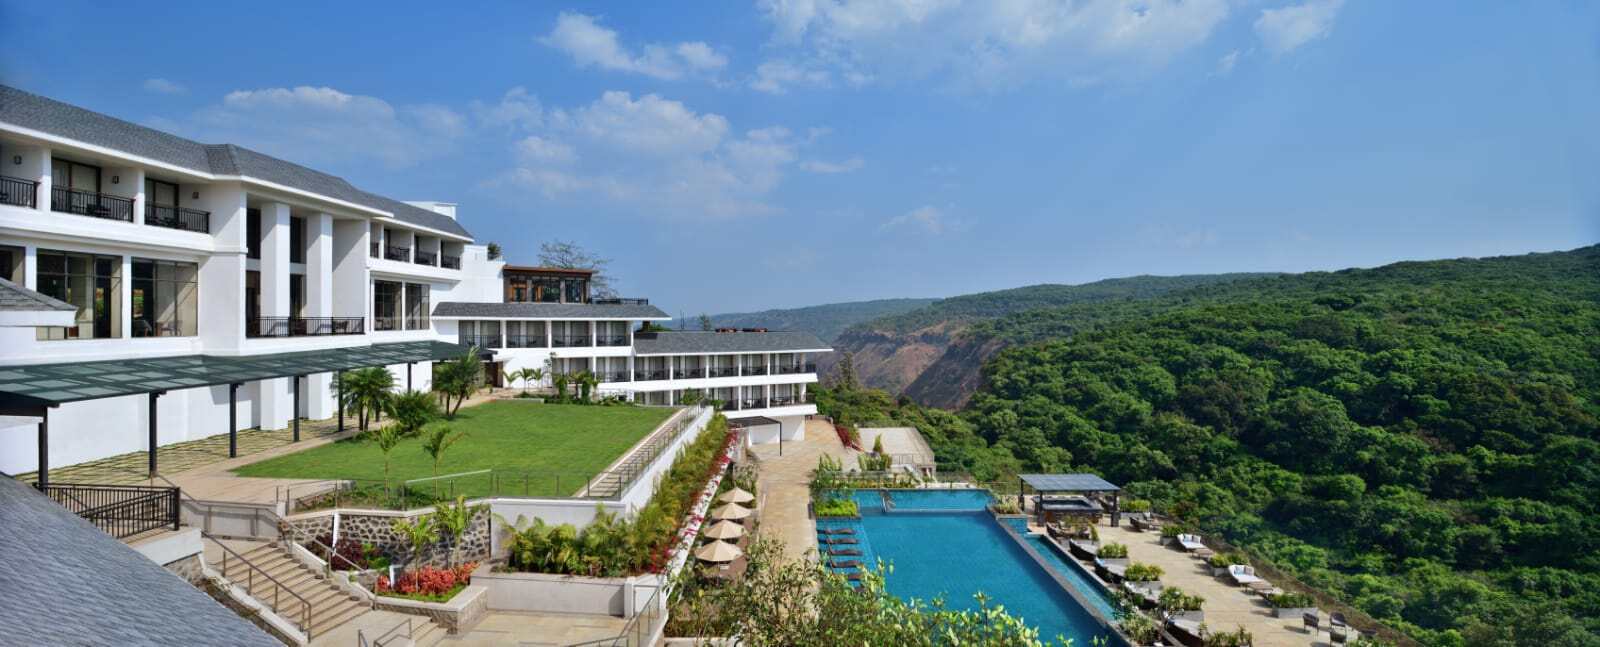 Courtyard by Marriott Mahabaleshwar Your Year Round Escape to Serenity TheStyle (1)